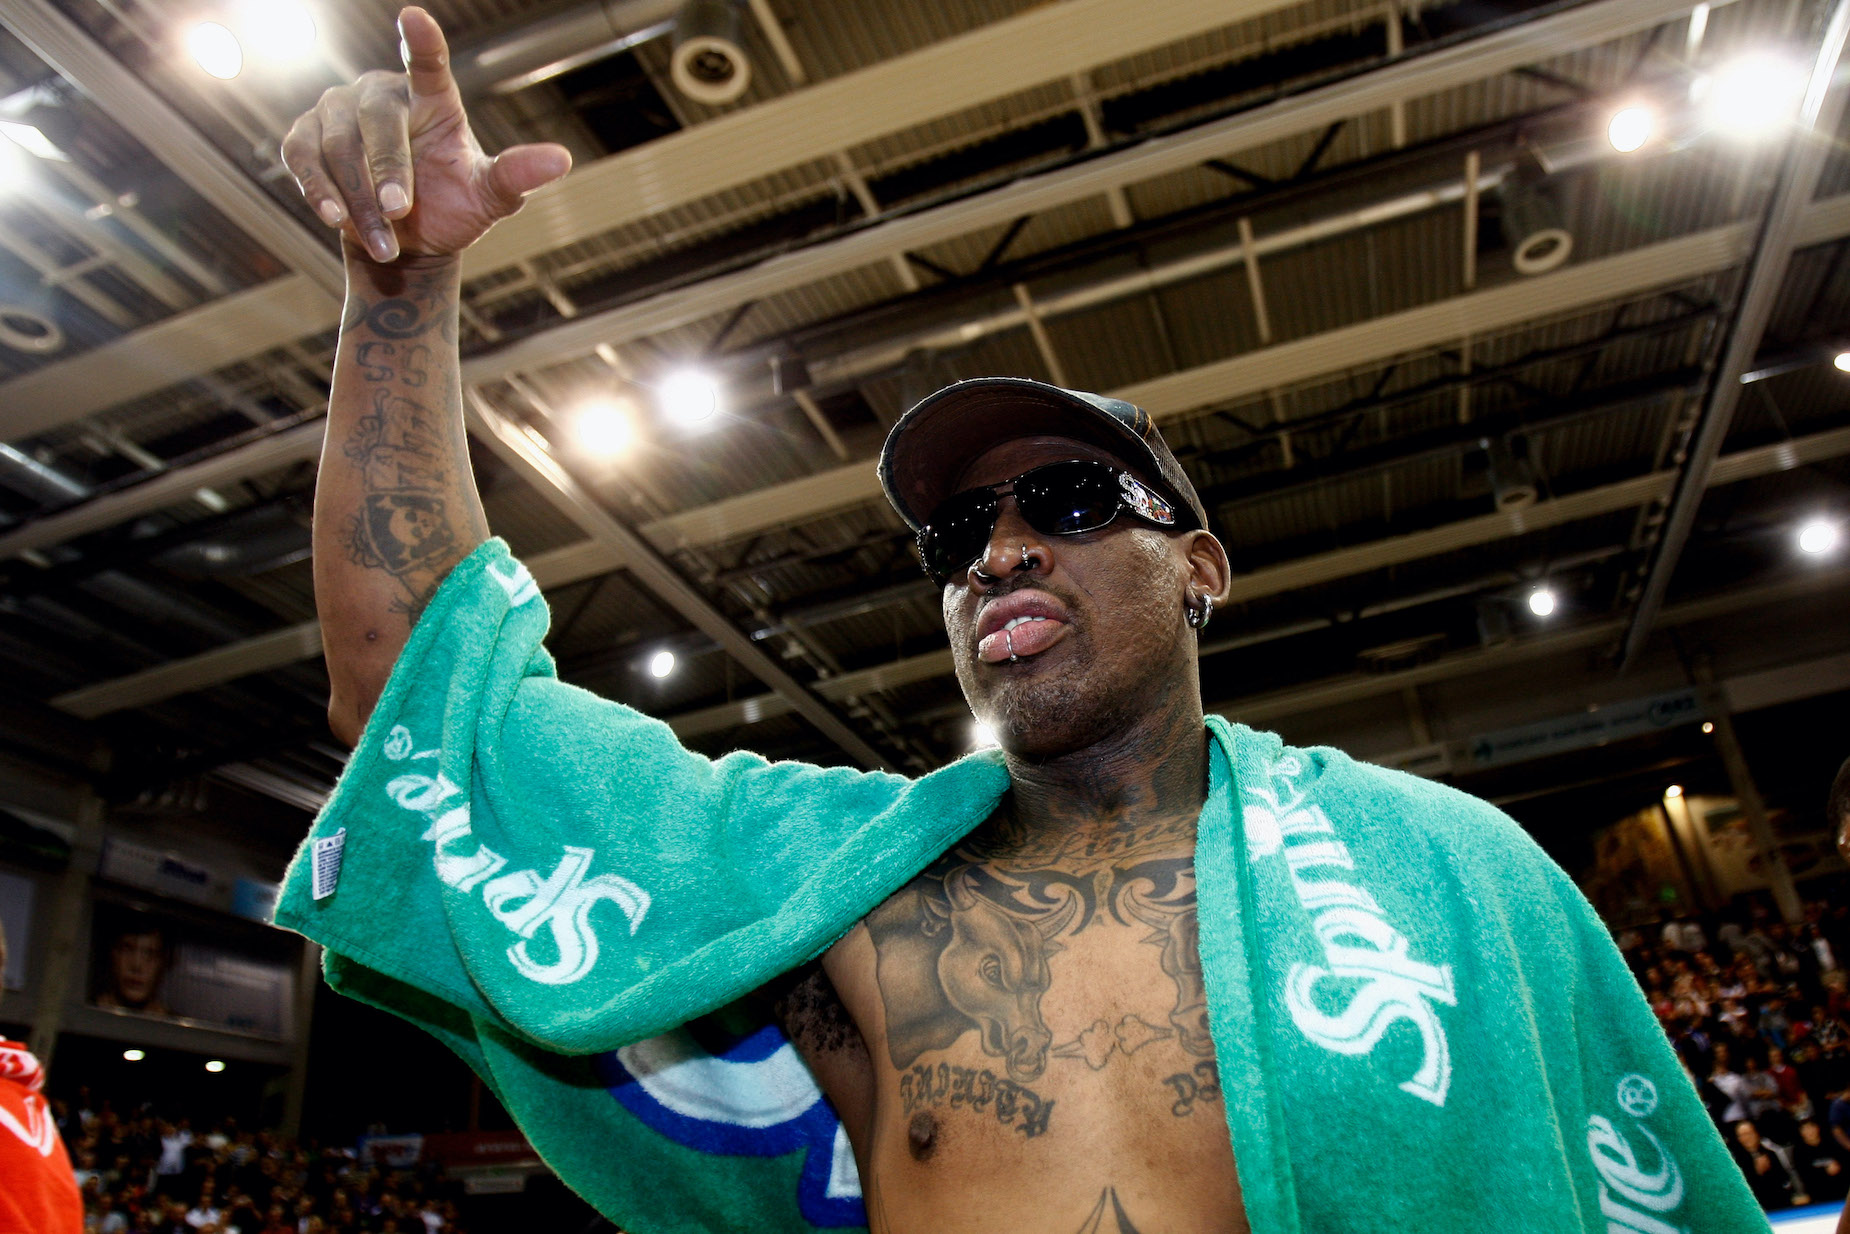 NBA legend Dennis Rodman gestures to the crowd during a 2009 exhibition in Germany.